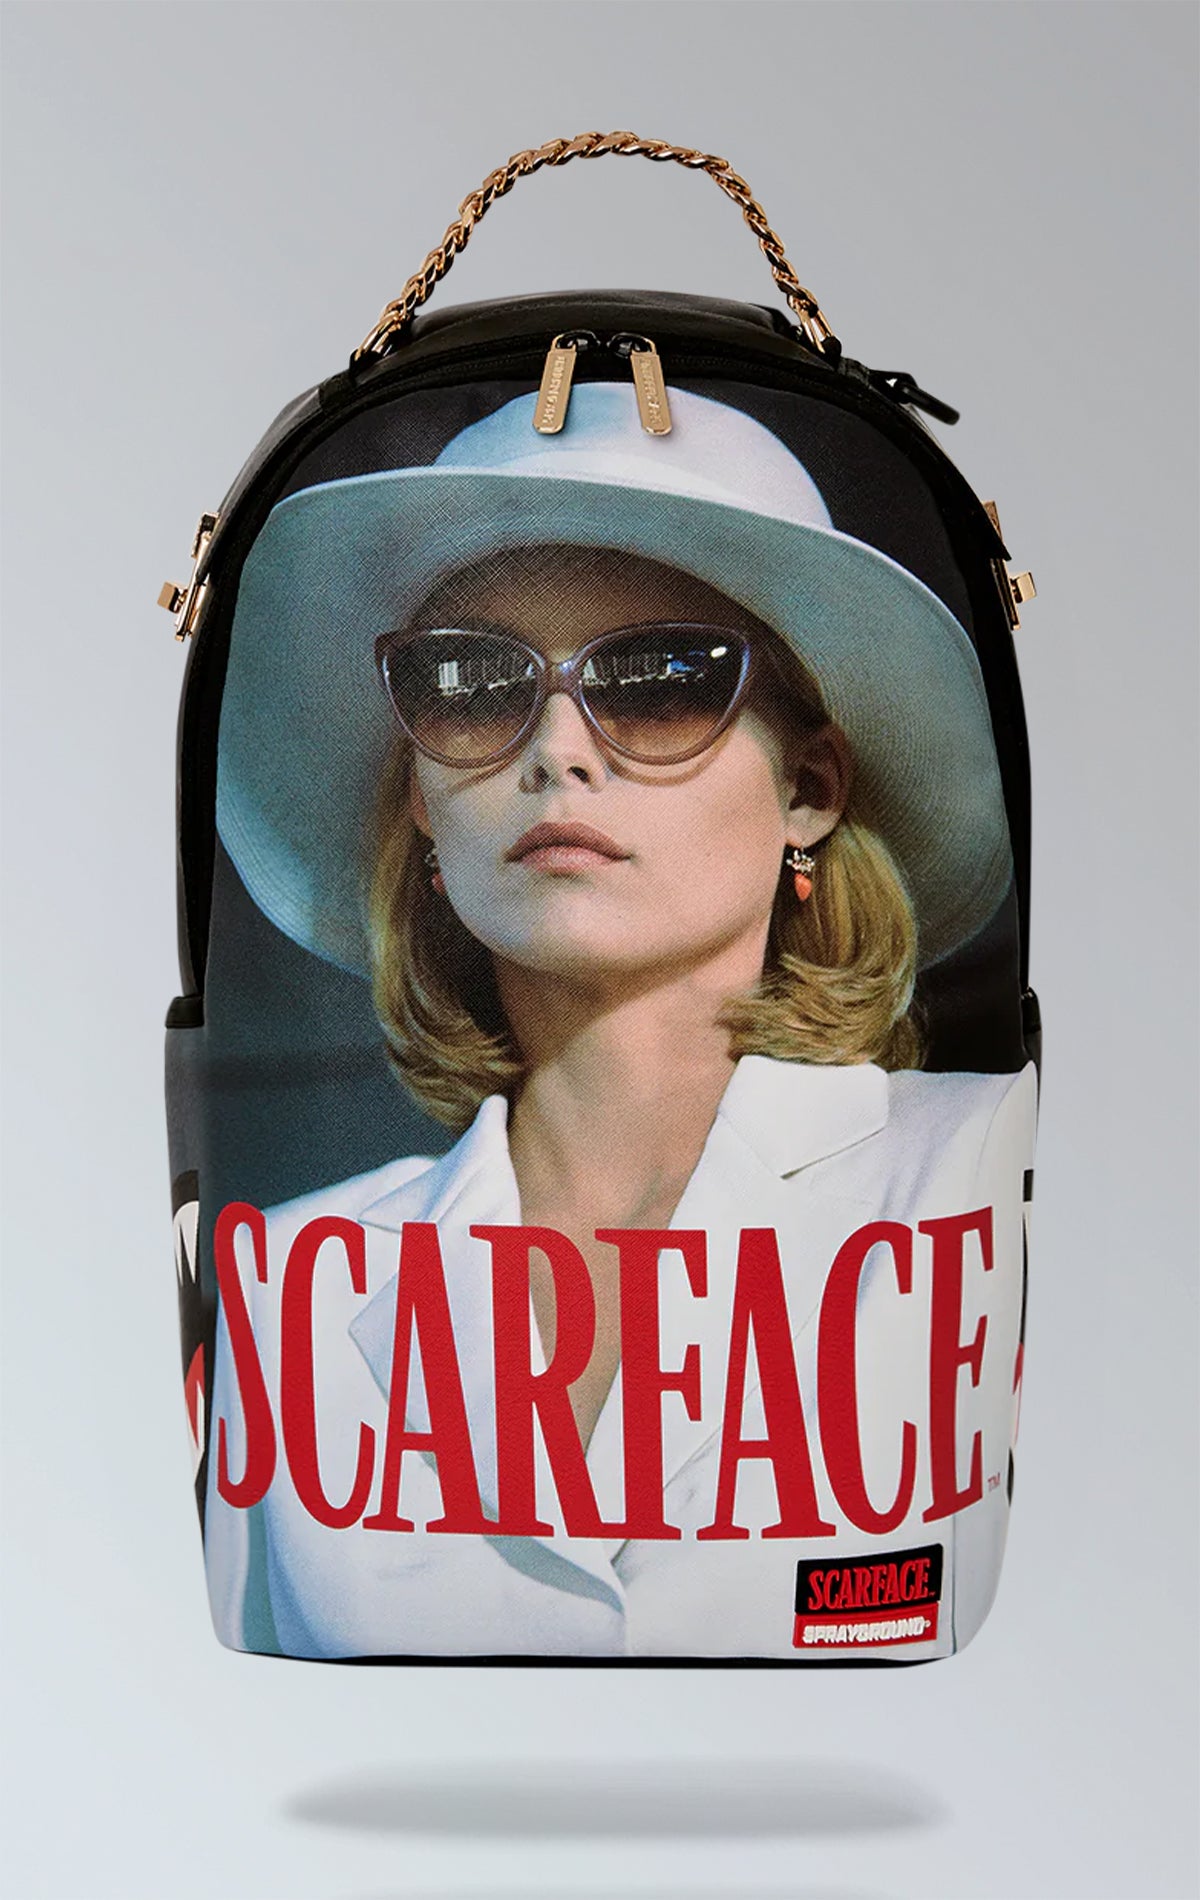 SCARFACE MICHELLE PFEIFFER BACKPACK. Exterior: Measurements: 18" x 6" x 11.5" Front zip pocket, side pockets, stash pocket with zipper. Separate compartment for sunglasses with velour lining, comfortable padded mesh back. Flexible straps for personalized fit. Gold zippers and metal hardware. "Sprayground Authentic" badge in metal. Back sleeve with strap attaches to carry-on luggage for hands-free travel.